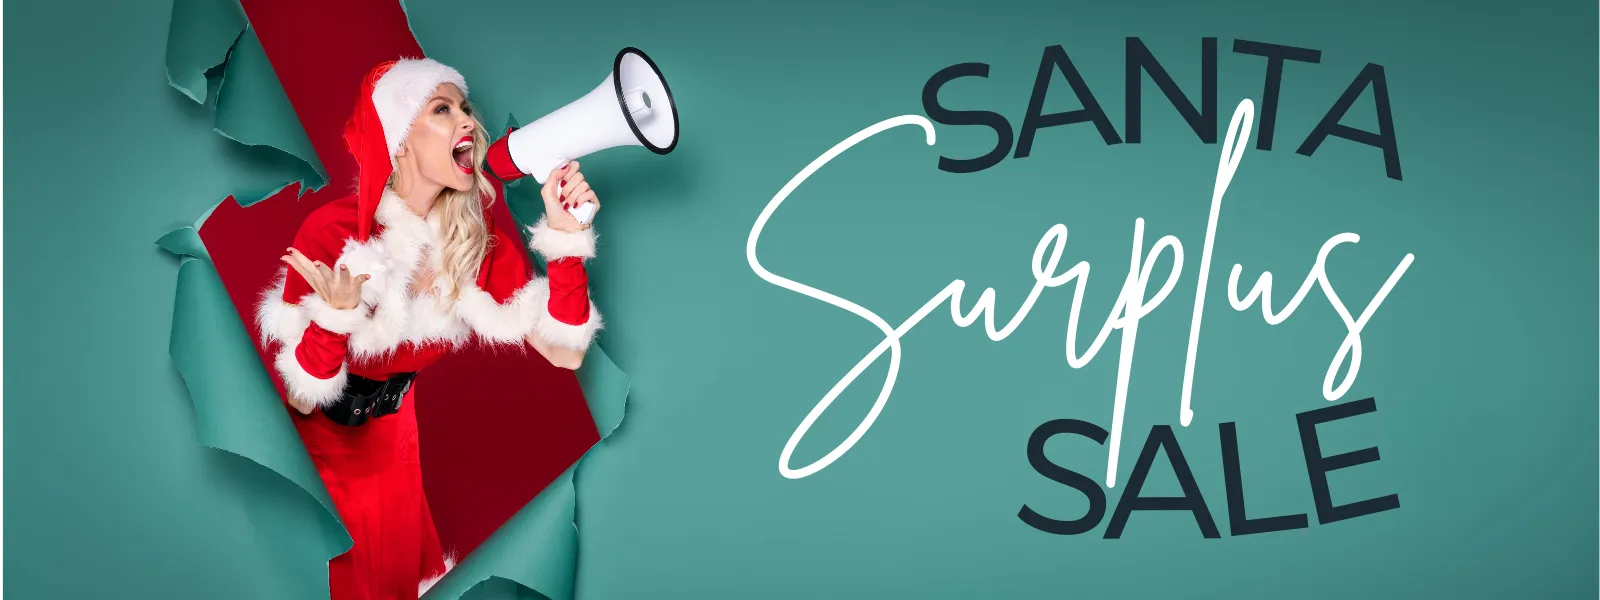 Santa Surplus Sale - Our largest sale after the holiday of fine jewelry and watches.